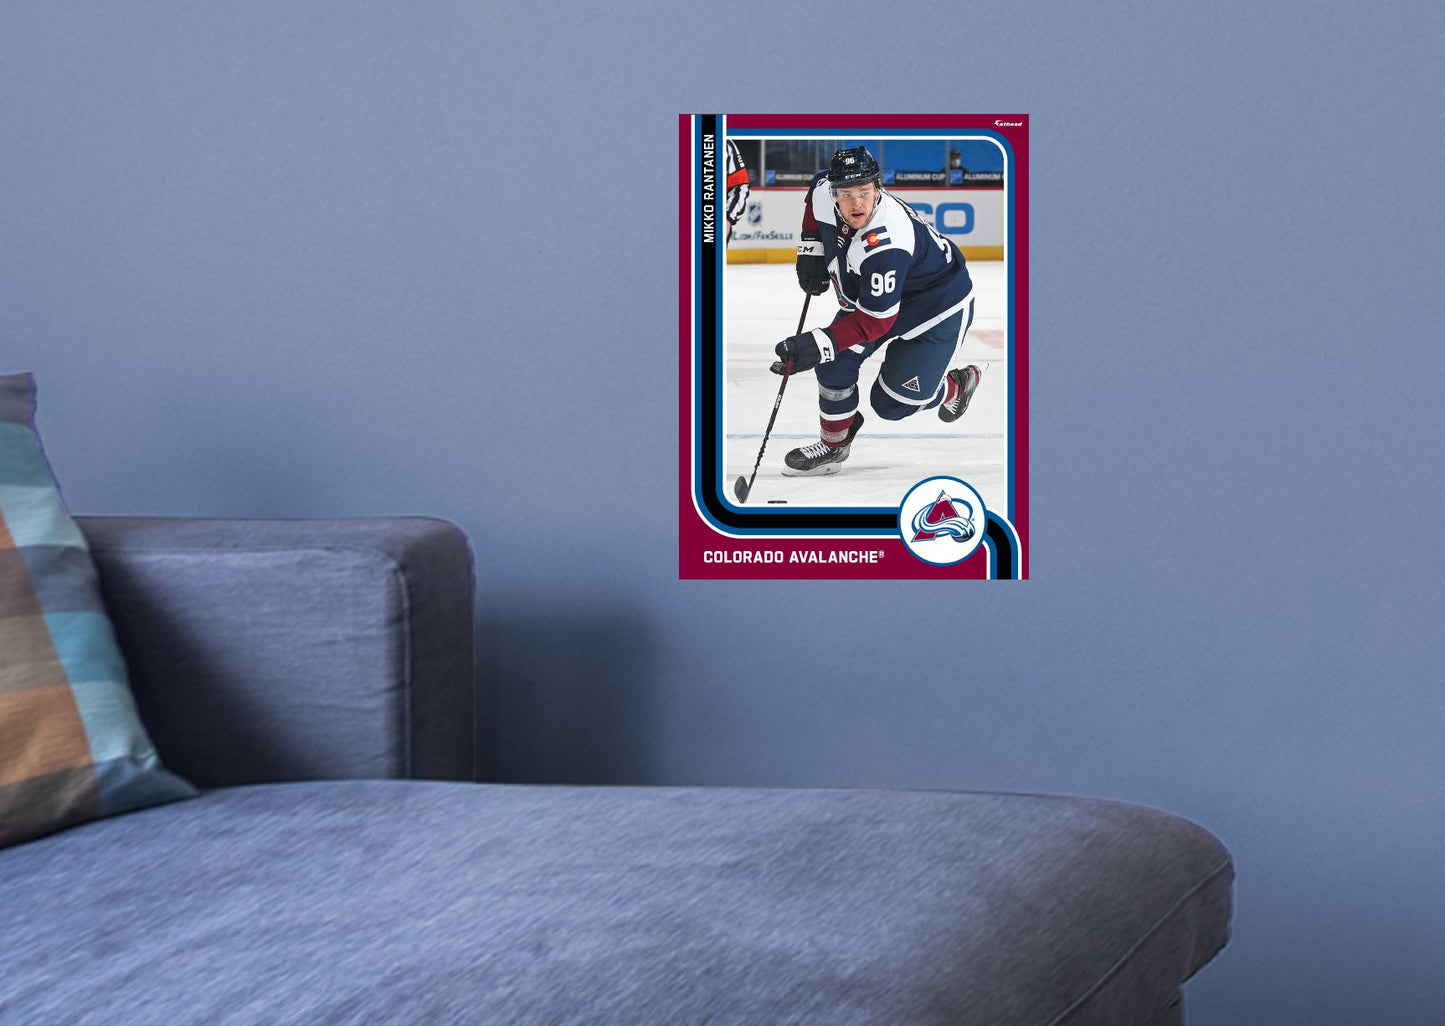 Colorado Avalanche: Mikko Rantanen Poster - Officially Licensed NHL Removable Adhesive Decal